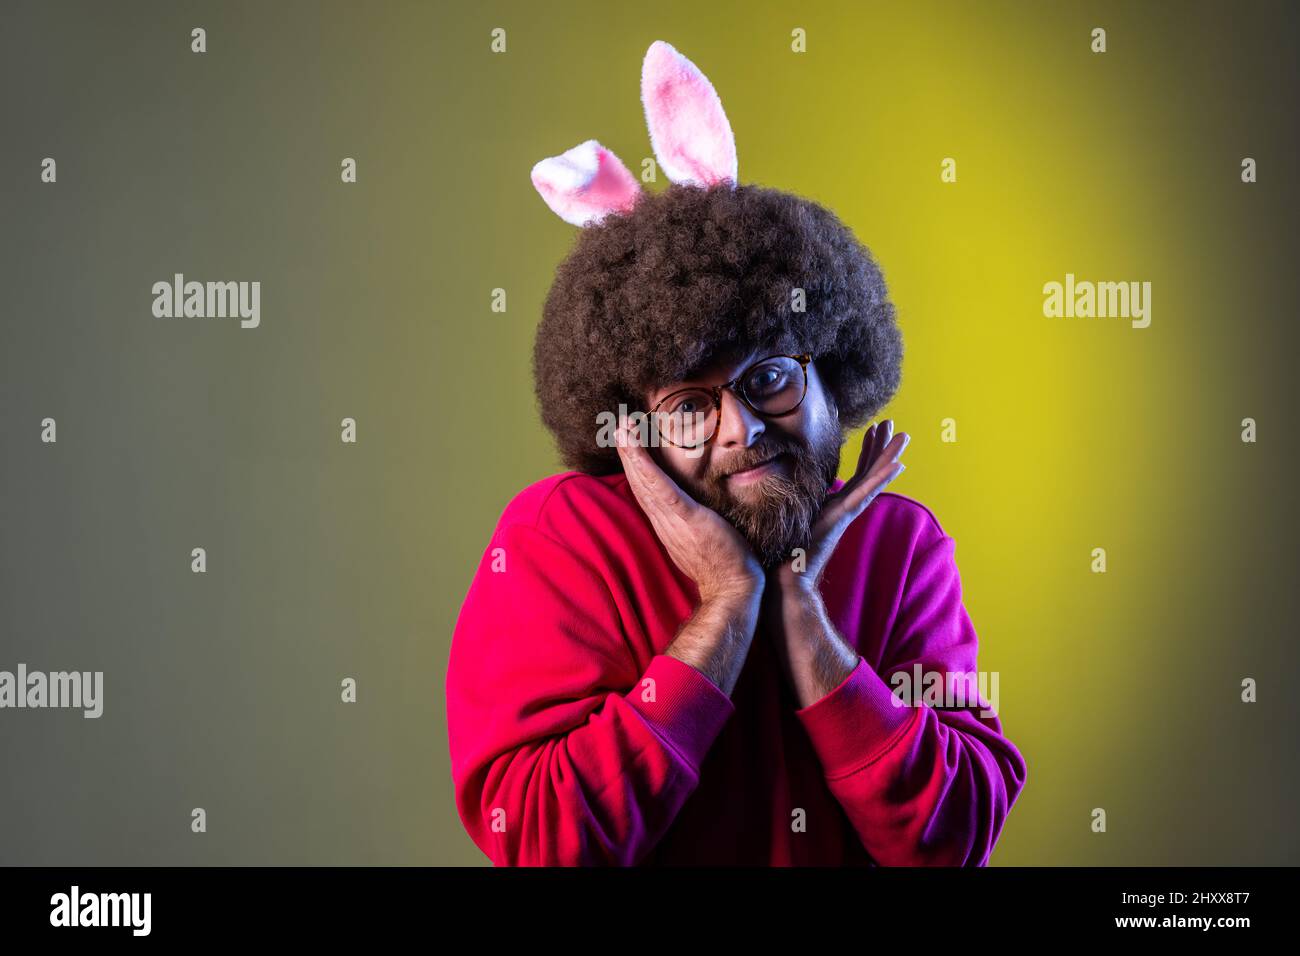 Portrait of cute charming hipster man with Afro hairstyle and bunny ears, looking at camera with smile, wearing red sweatshirt. Indoor studio shot isolated on colorful neon light background. Stock Photo